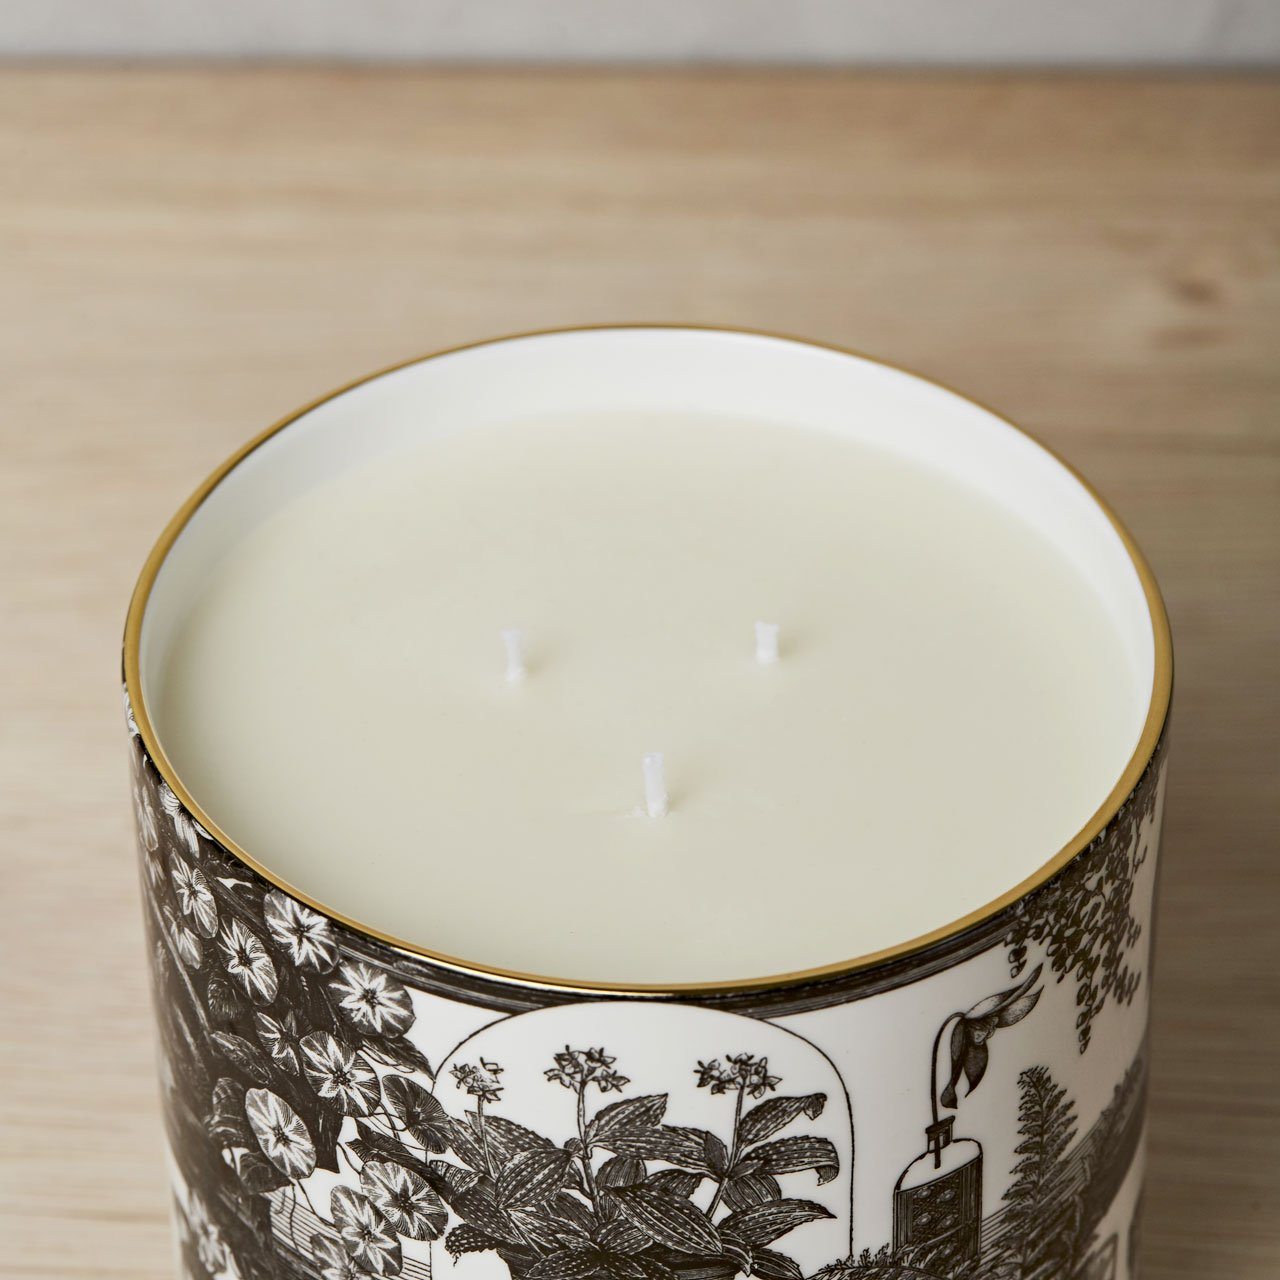 The Country Garden 3 Wick Scented Ceramic Candle - Chase and Wonder - Proudly Made in Britain